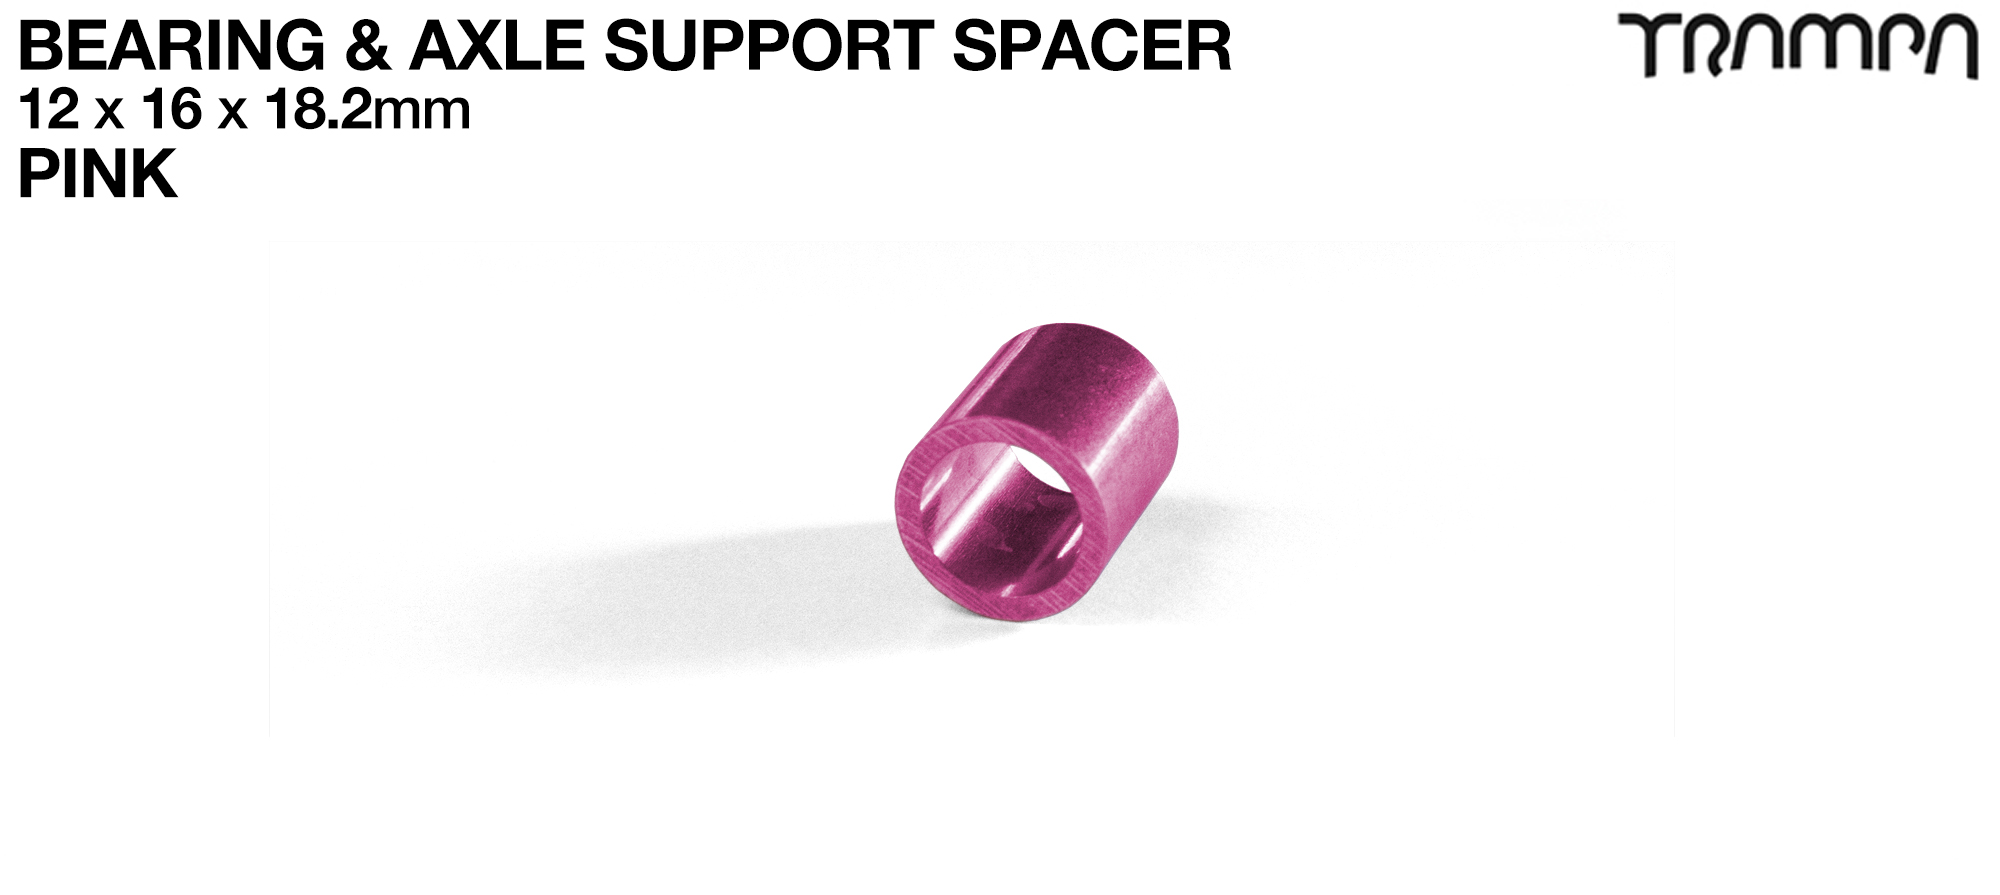 PINK 18.2mm Wheel Support Axle Spacers 